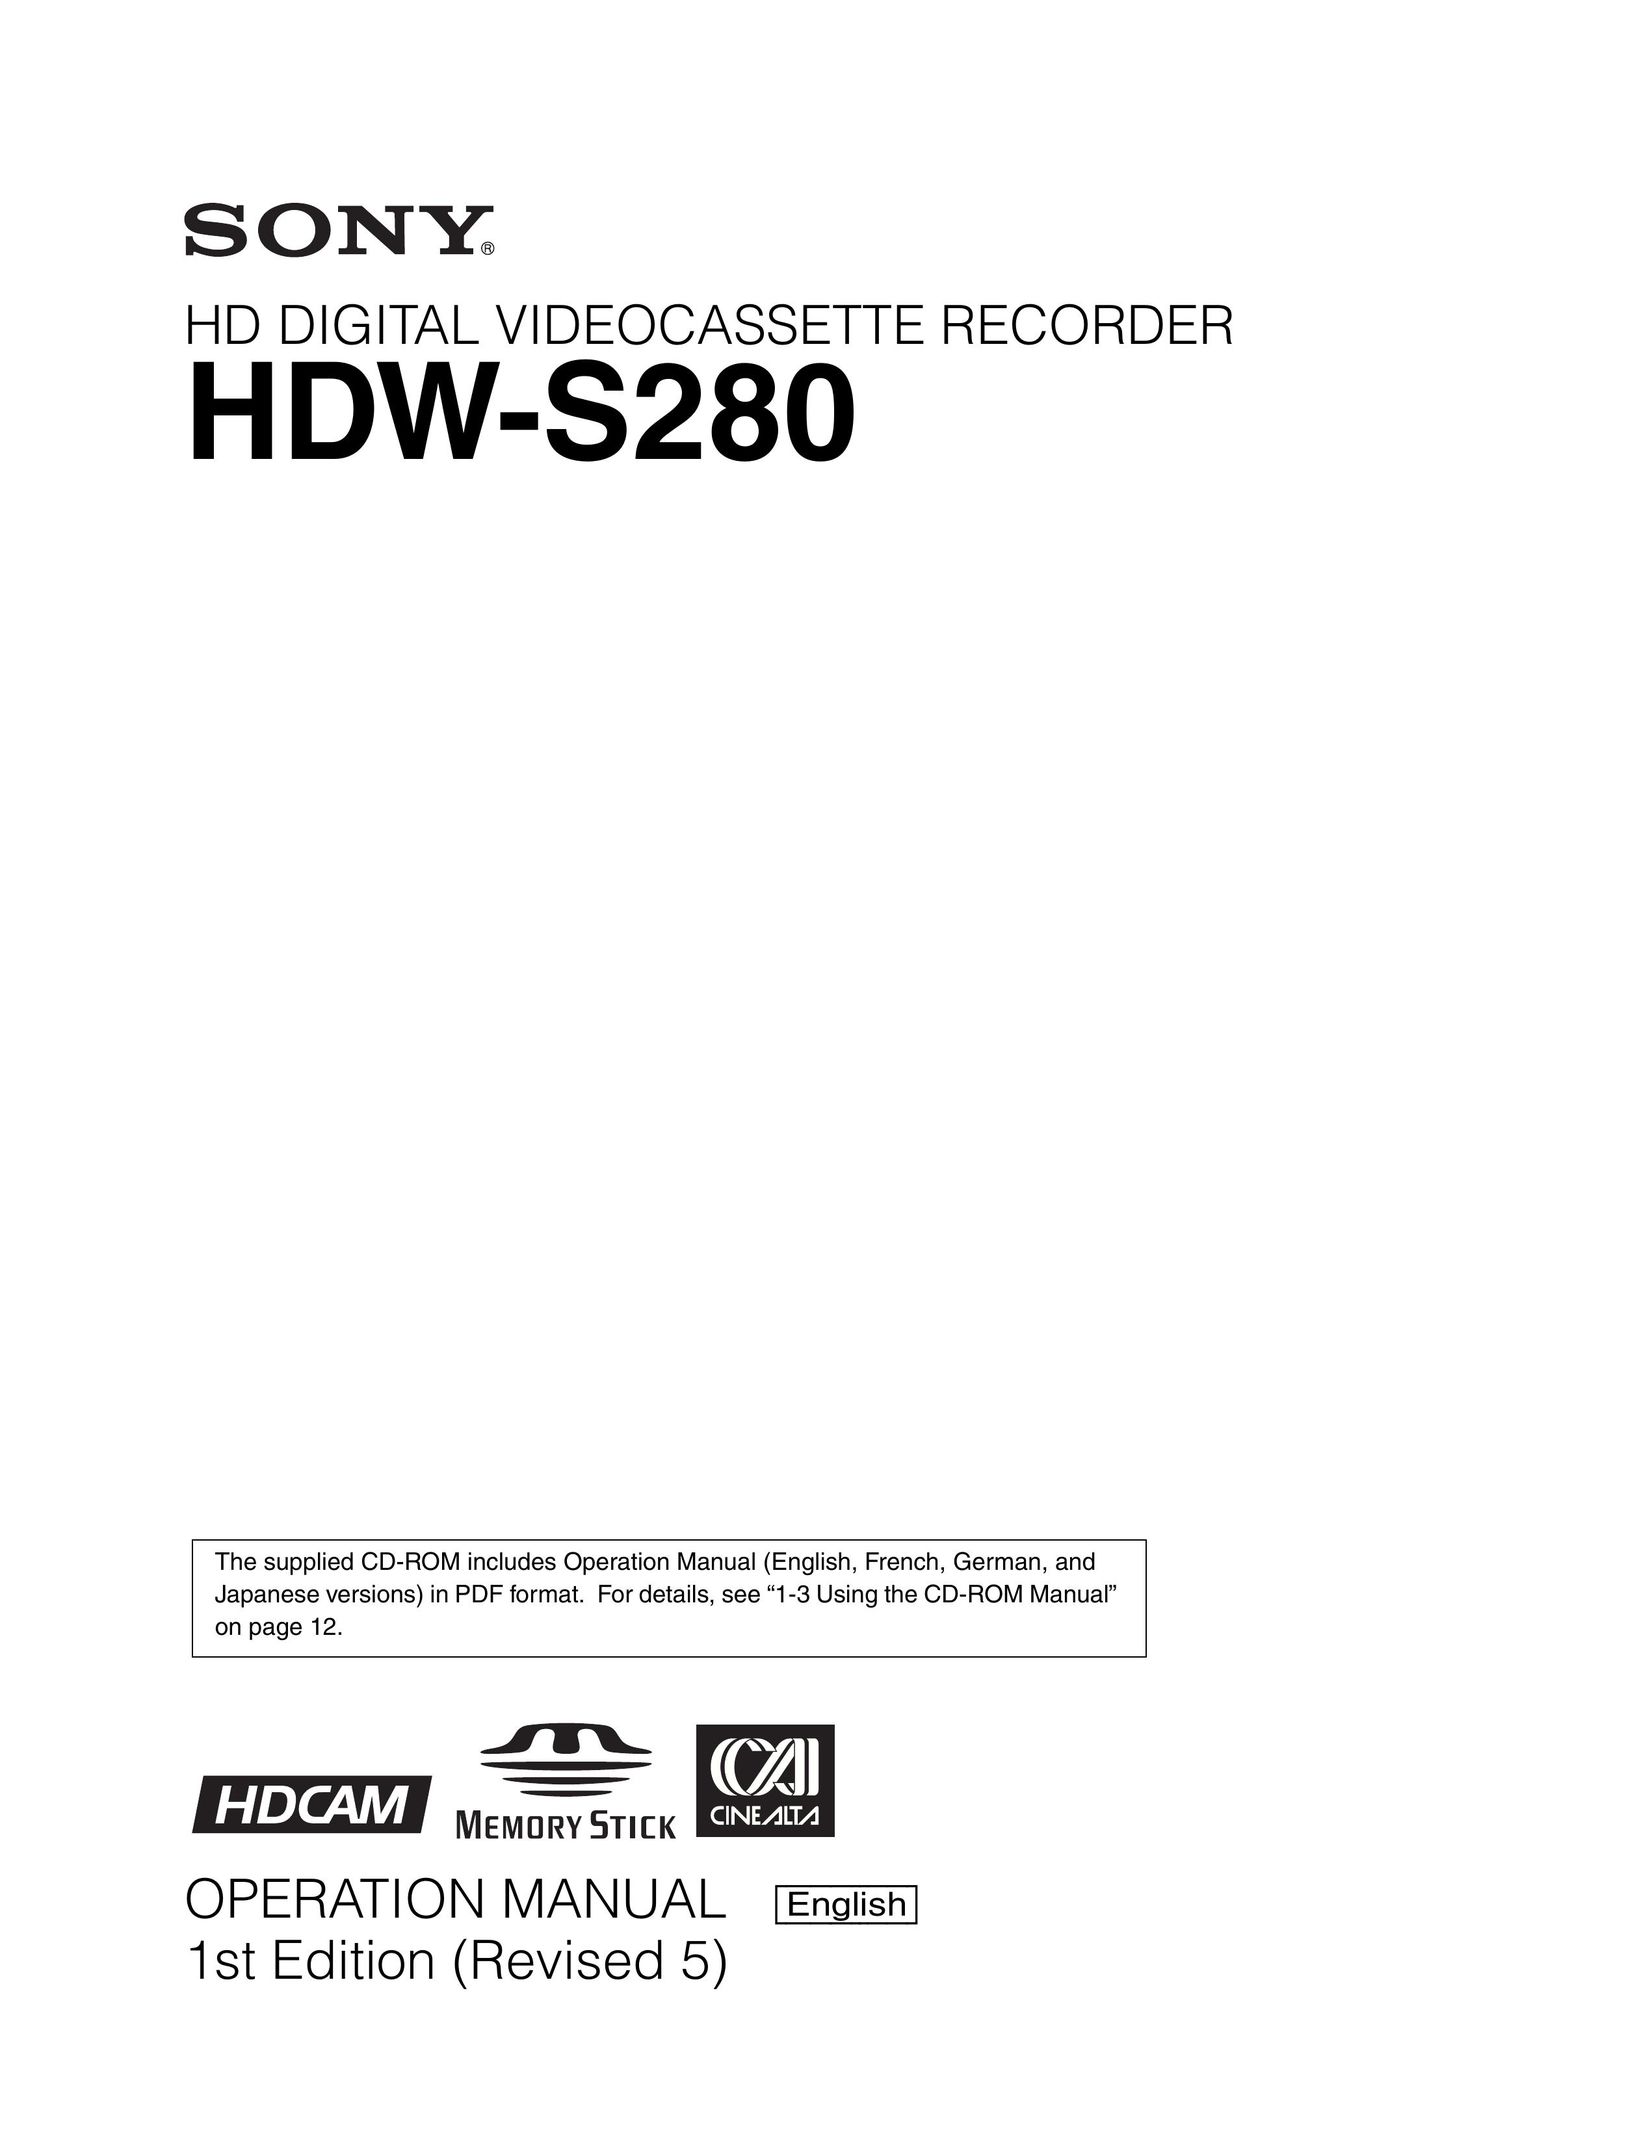 Sony HDW-S280 DVD VCR Combo User Manual